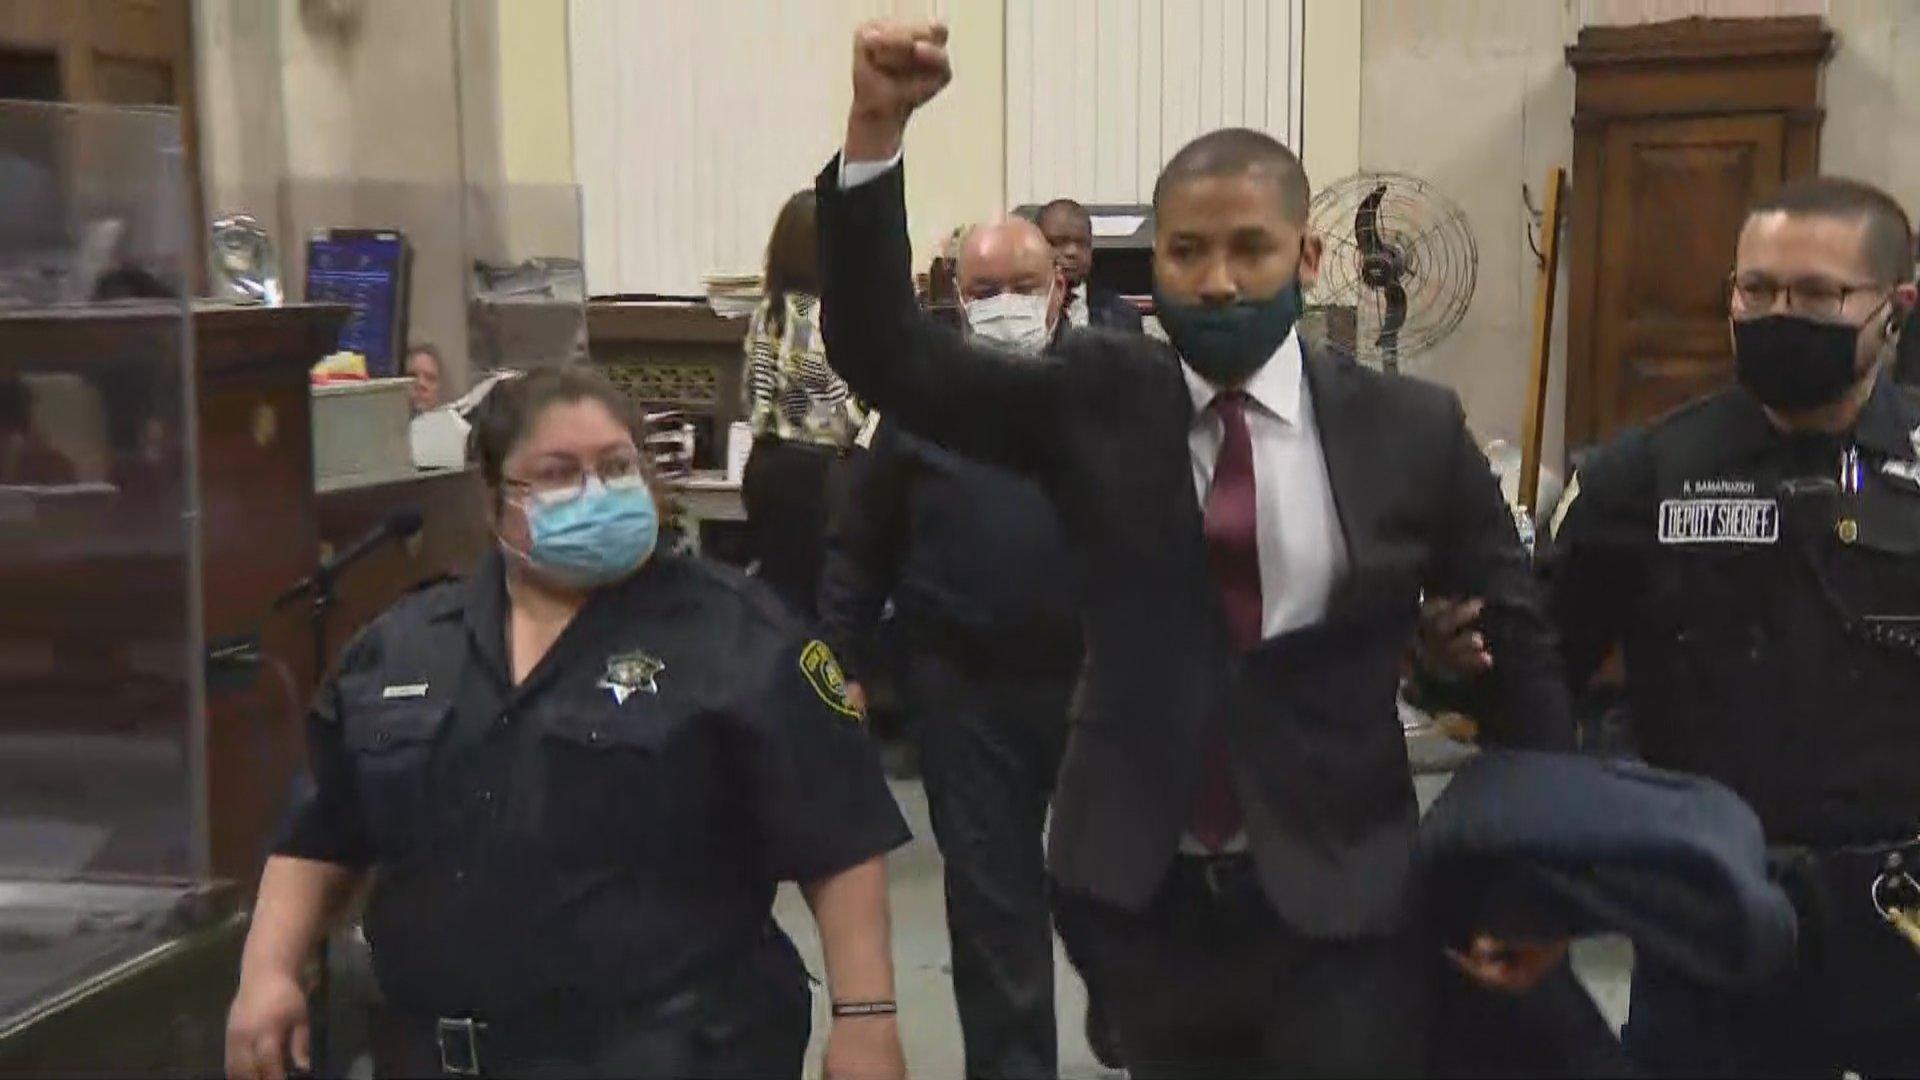 Jussie Smollett raises his hand while proclaiming his innocence as he is taken out of the courtroom at the Leighton Criminal Court Building to begin his 150-day jail sentence on March 10, 2022. (WTTW News)